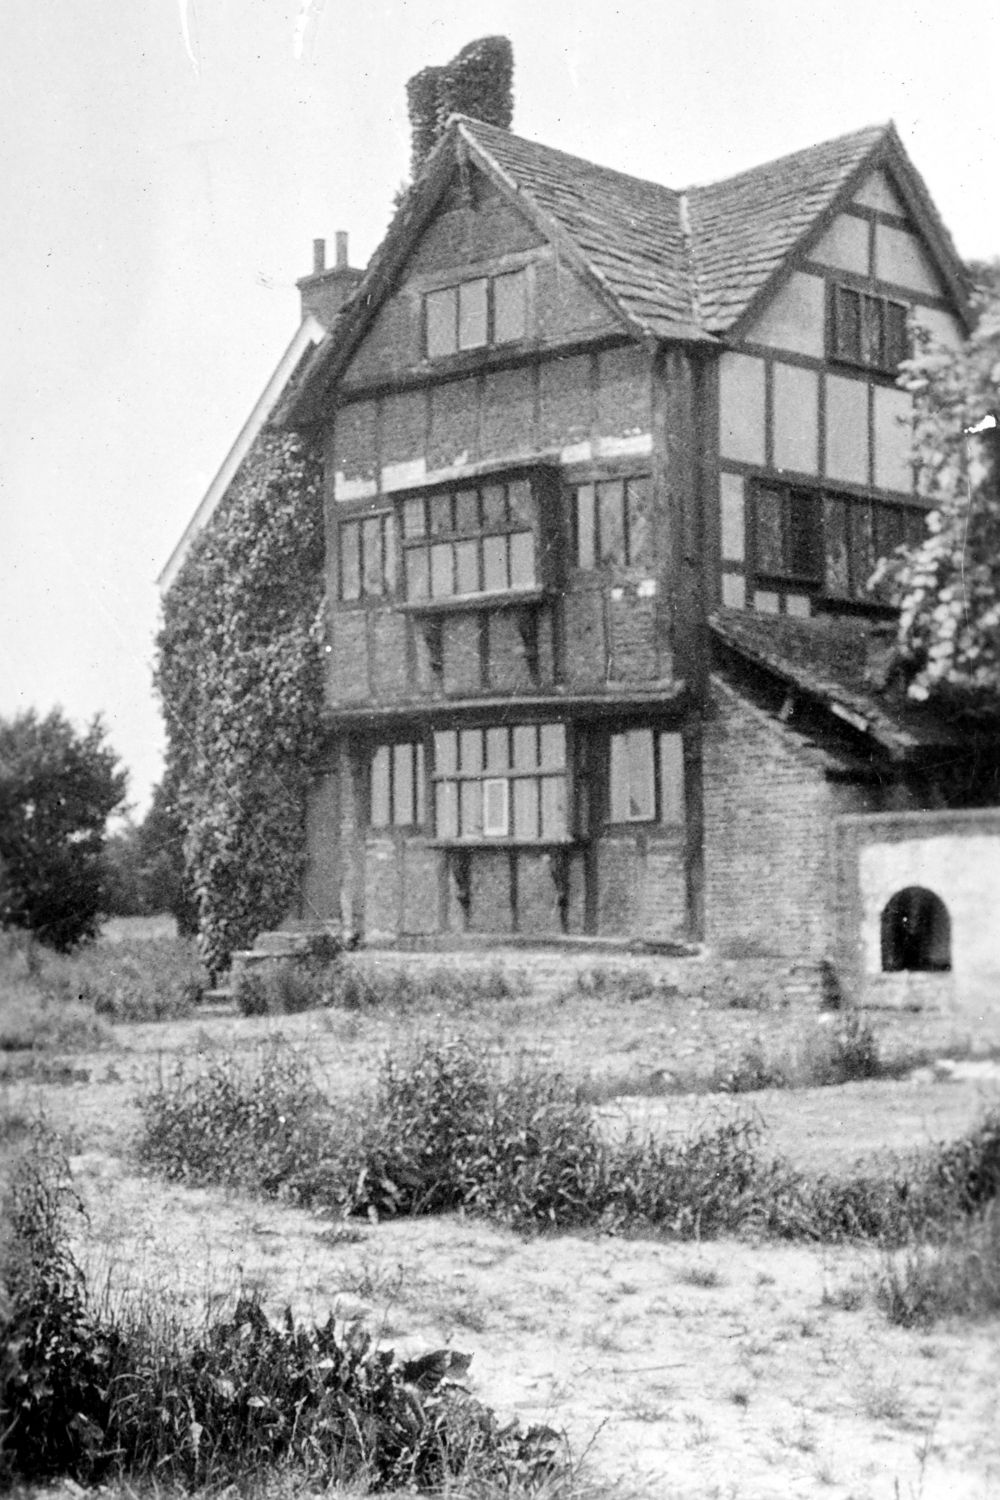 Black and white photograph of a half timbered building